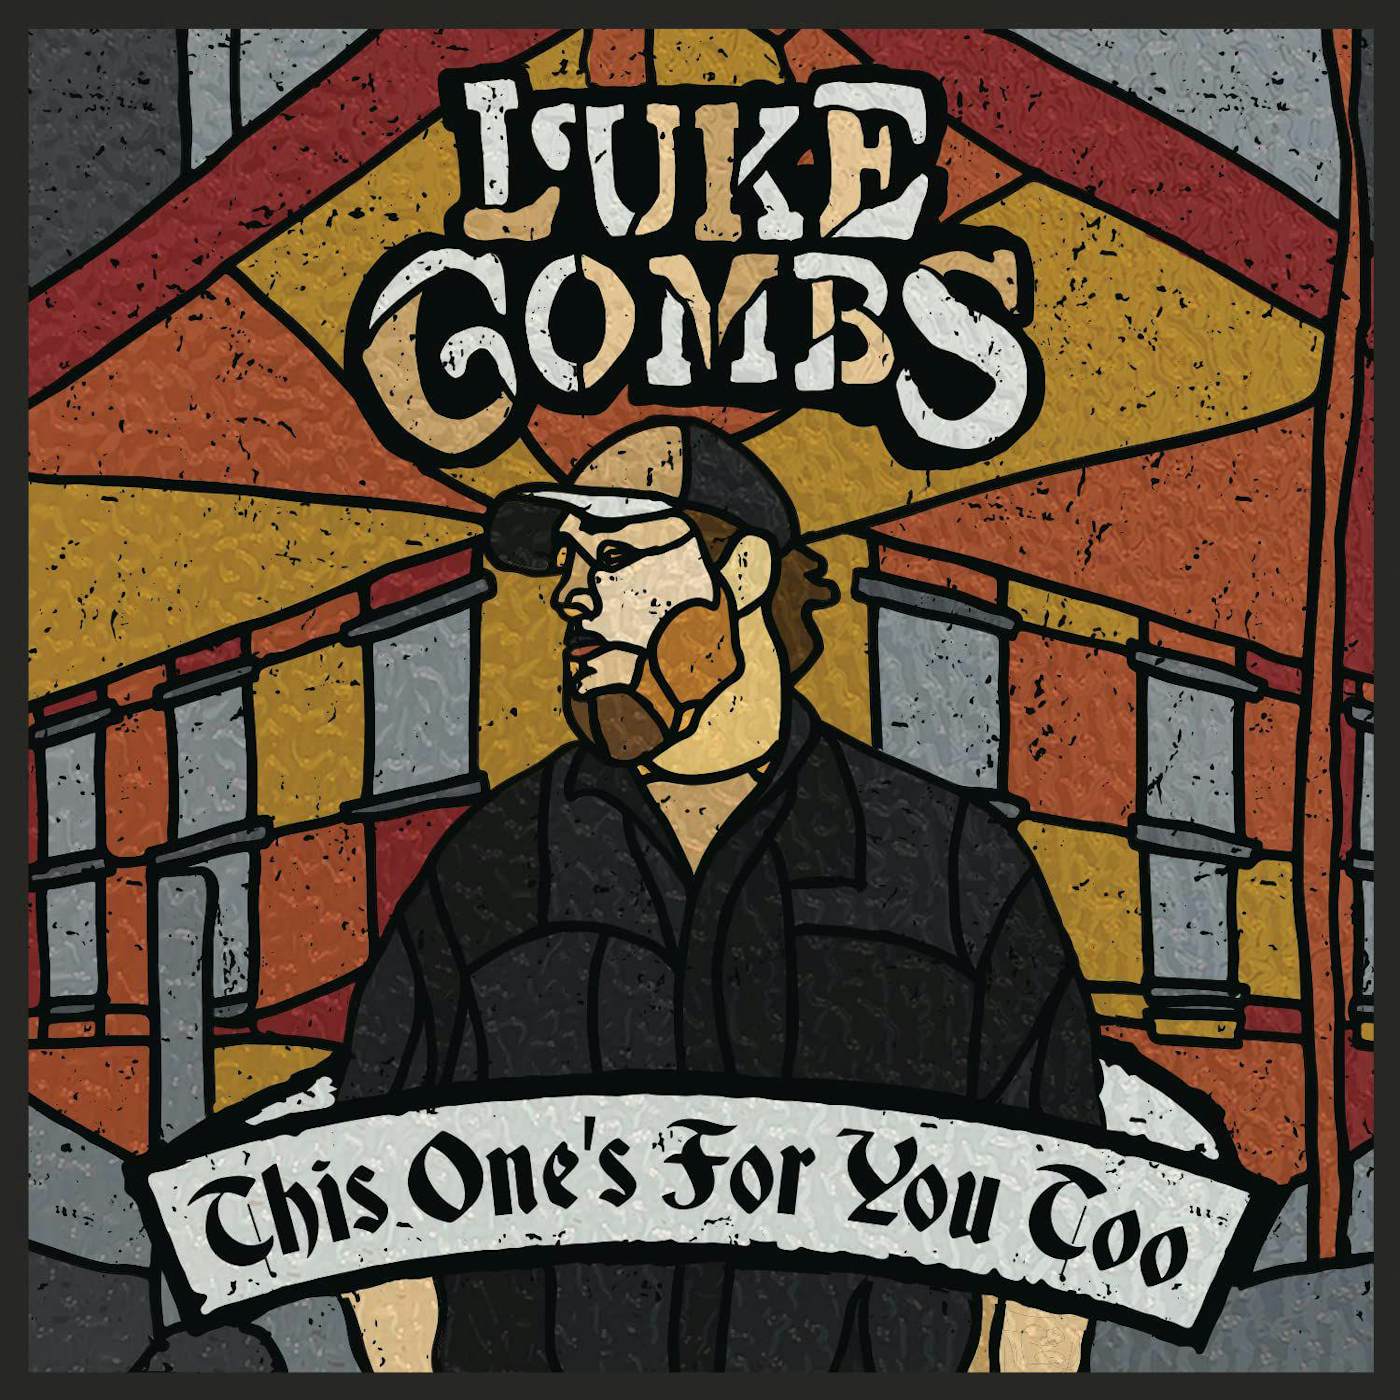 Luke Combs This One's For You Too (Deluxe/2LP) Vinyl Record